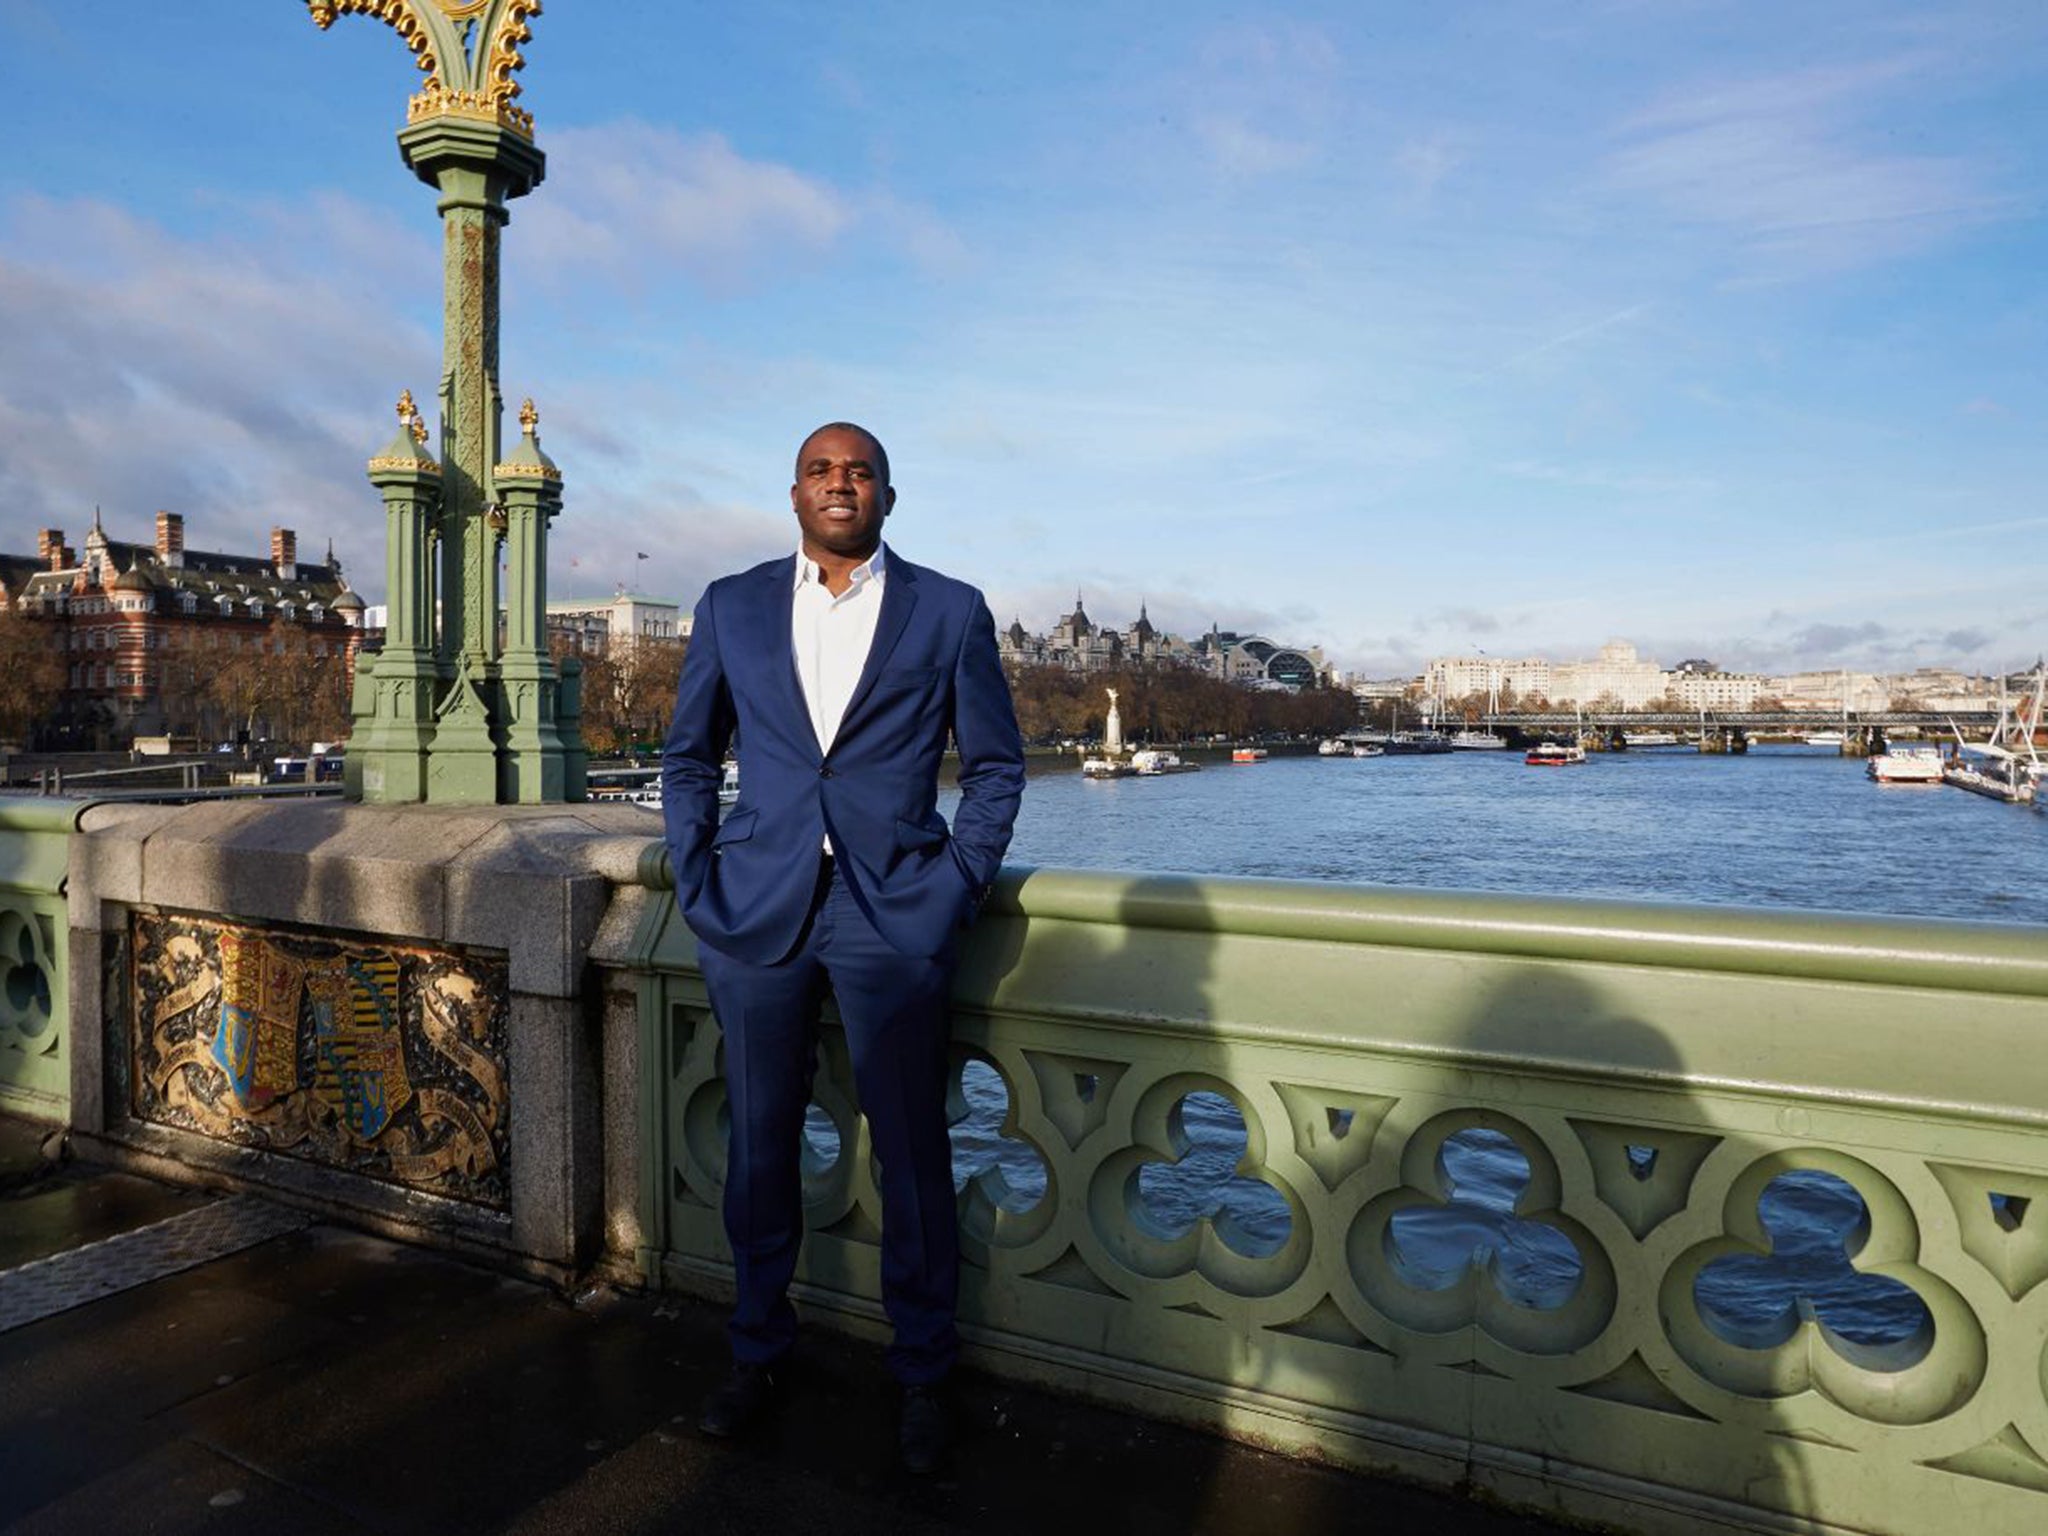 At the age of 42, Labour MP David Lammy has announced his intention to run for Mayor of London (Justin Sutcliffe)